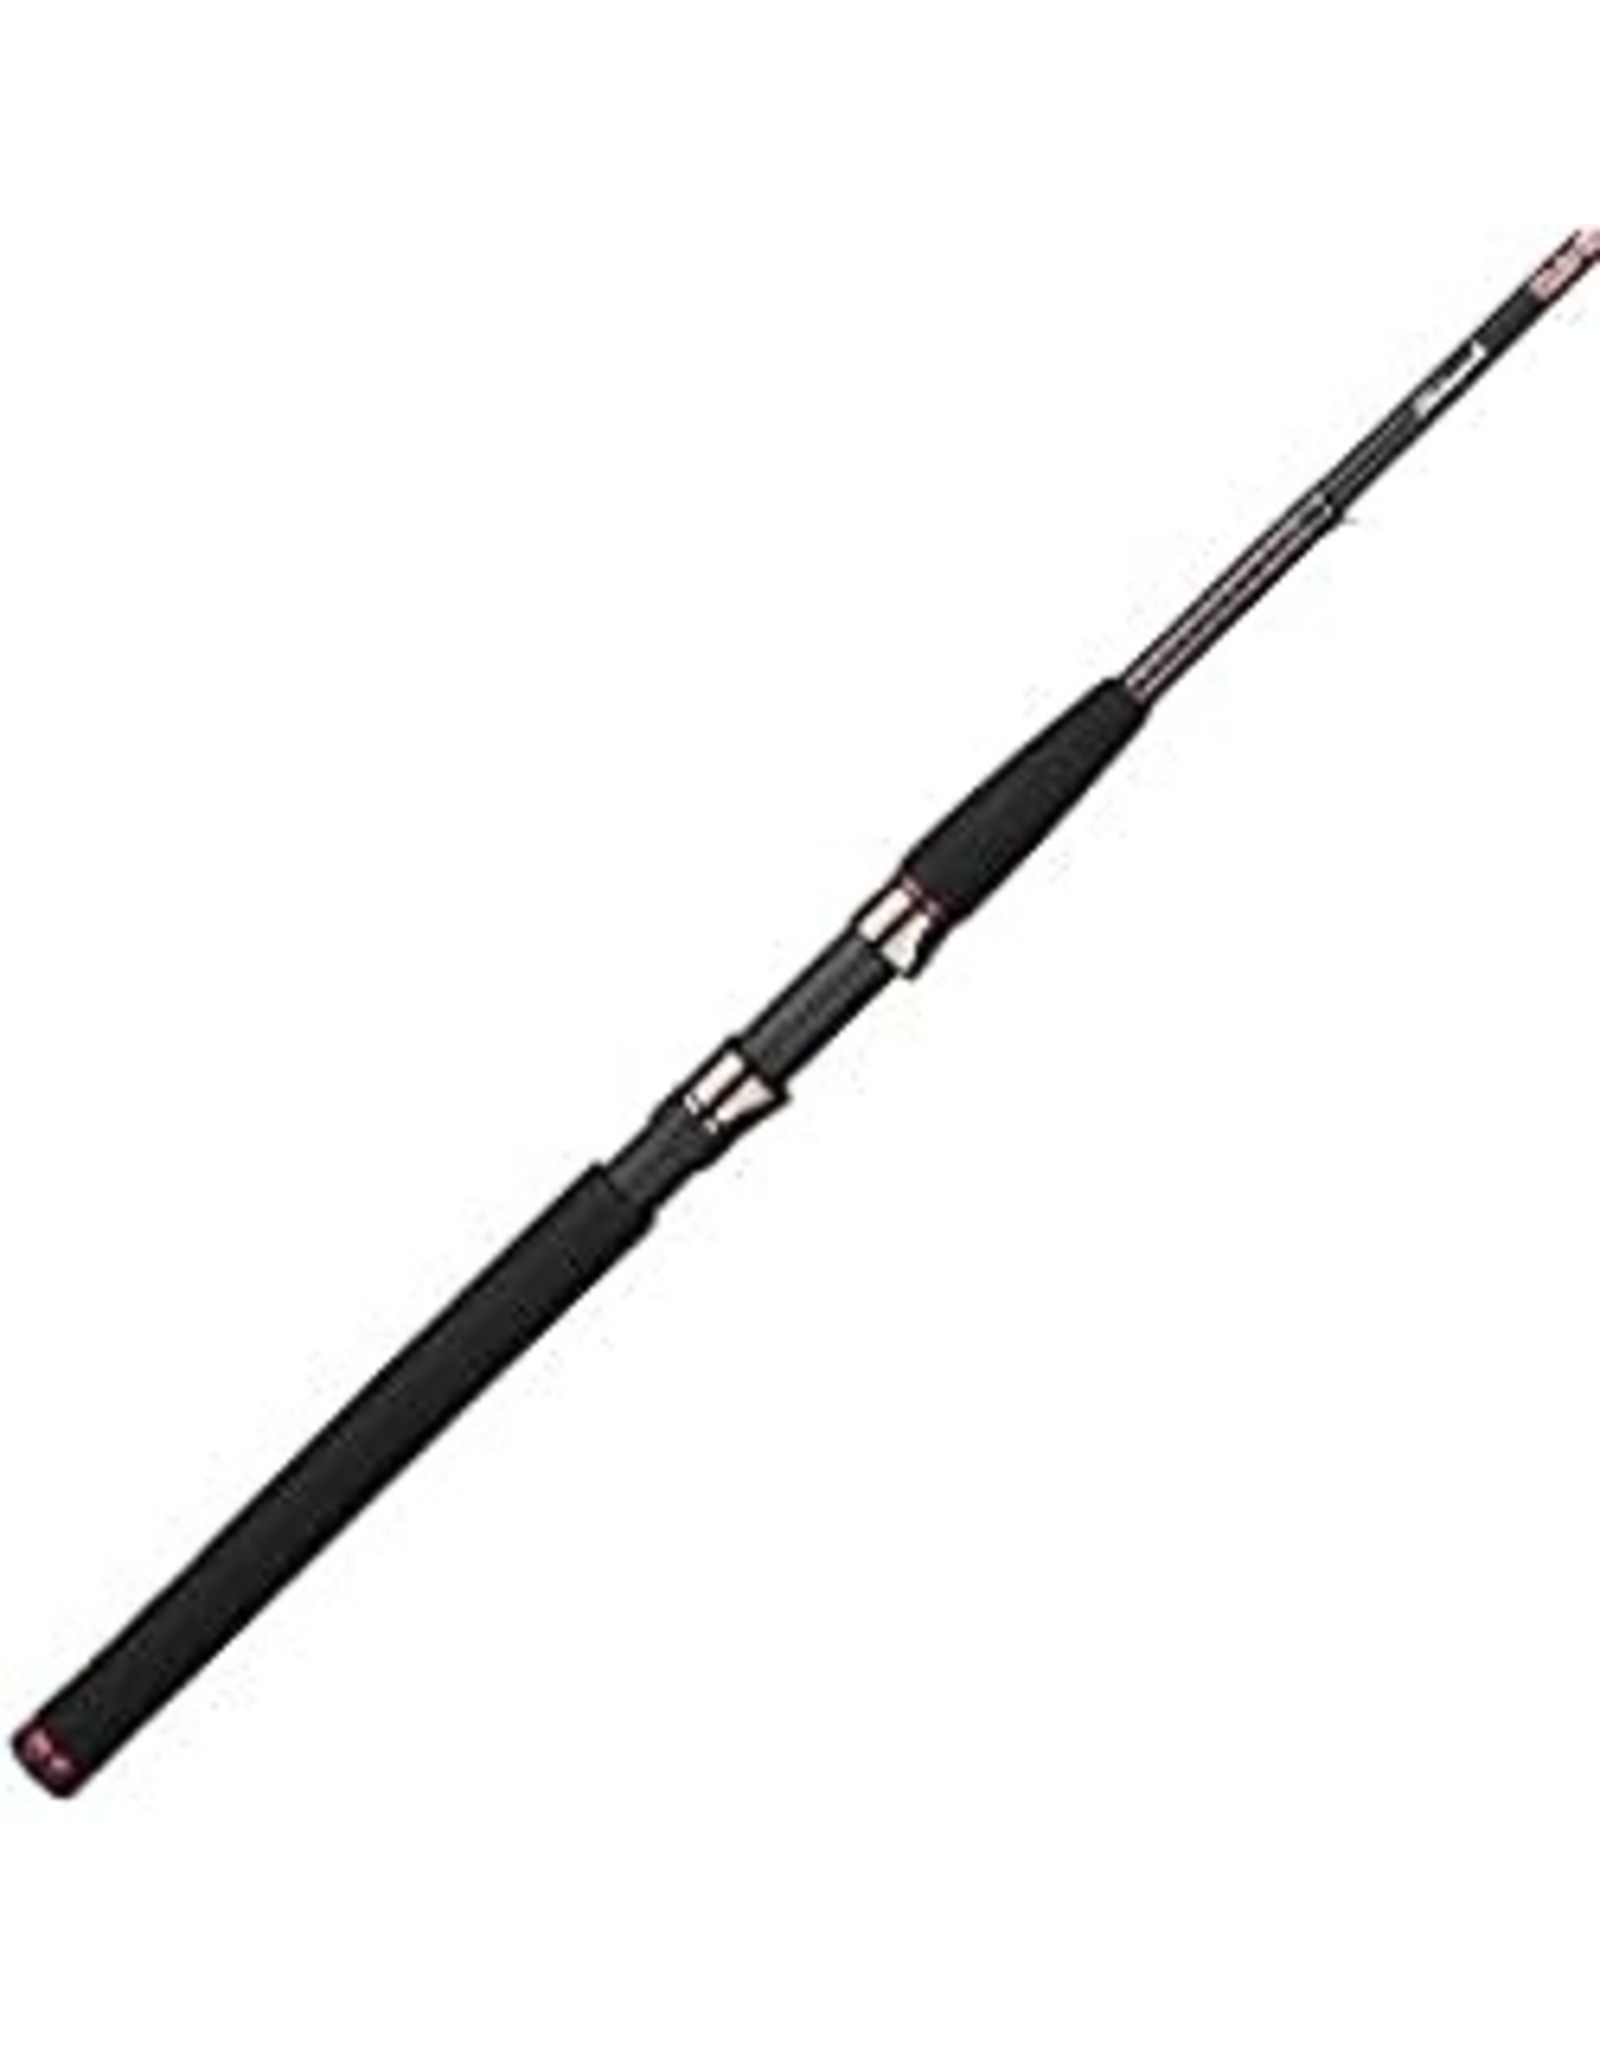 Shakespeare MGSP702L Micro Spinning Rod, 7', 2 Pc, LT, 1/16-3/8 oz